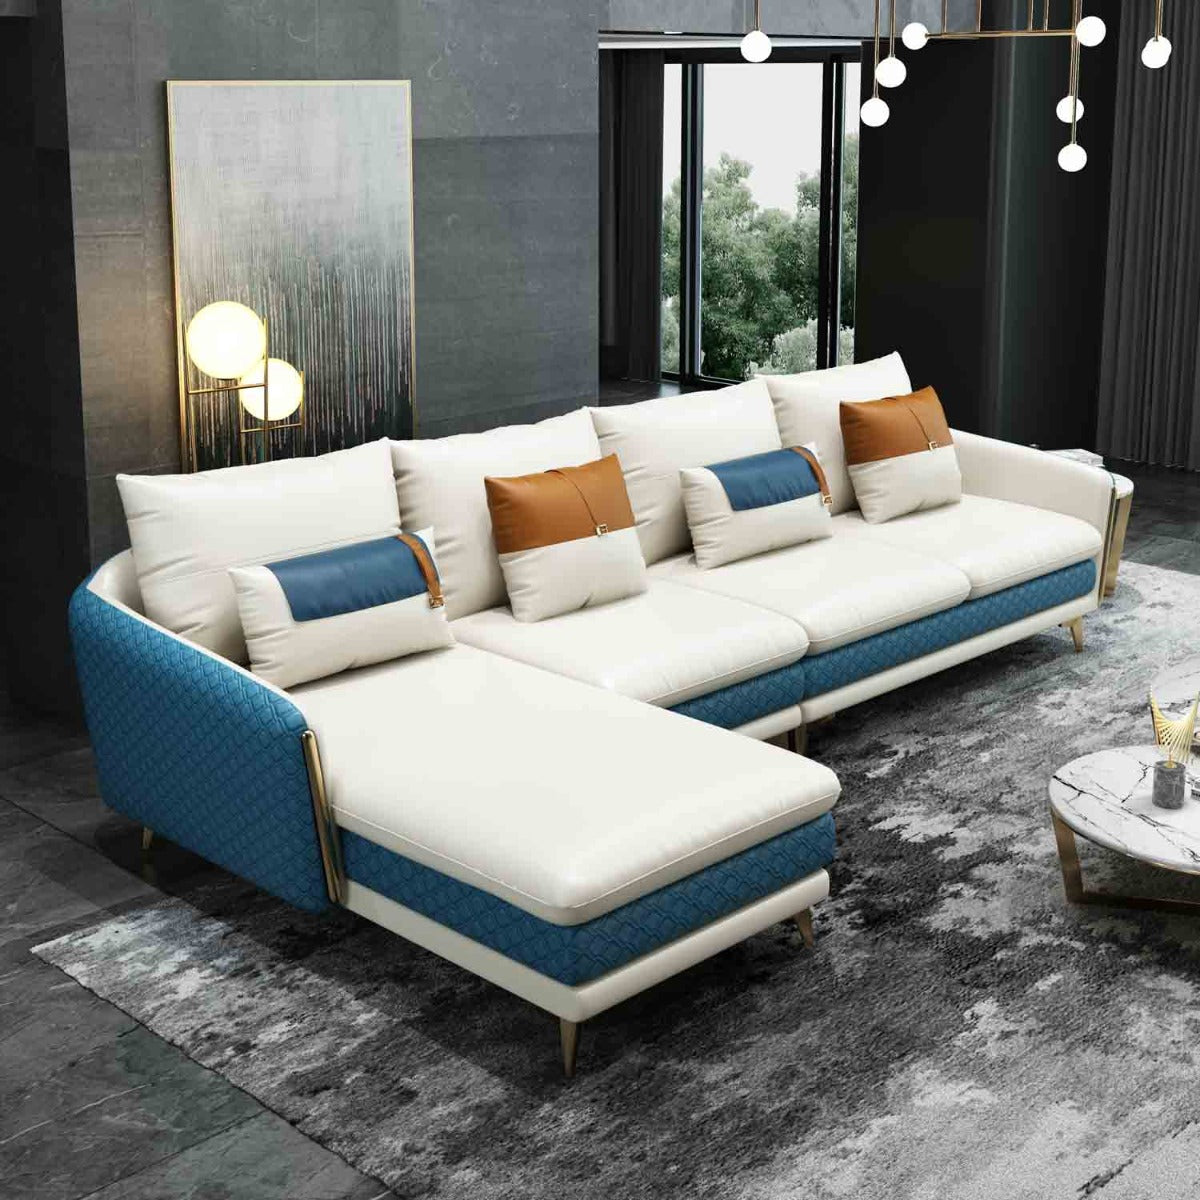 European Furniture - Icaro Left Hand Facing Sectional in Off White-Blue - 64437L-4LHF - New Star Living